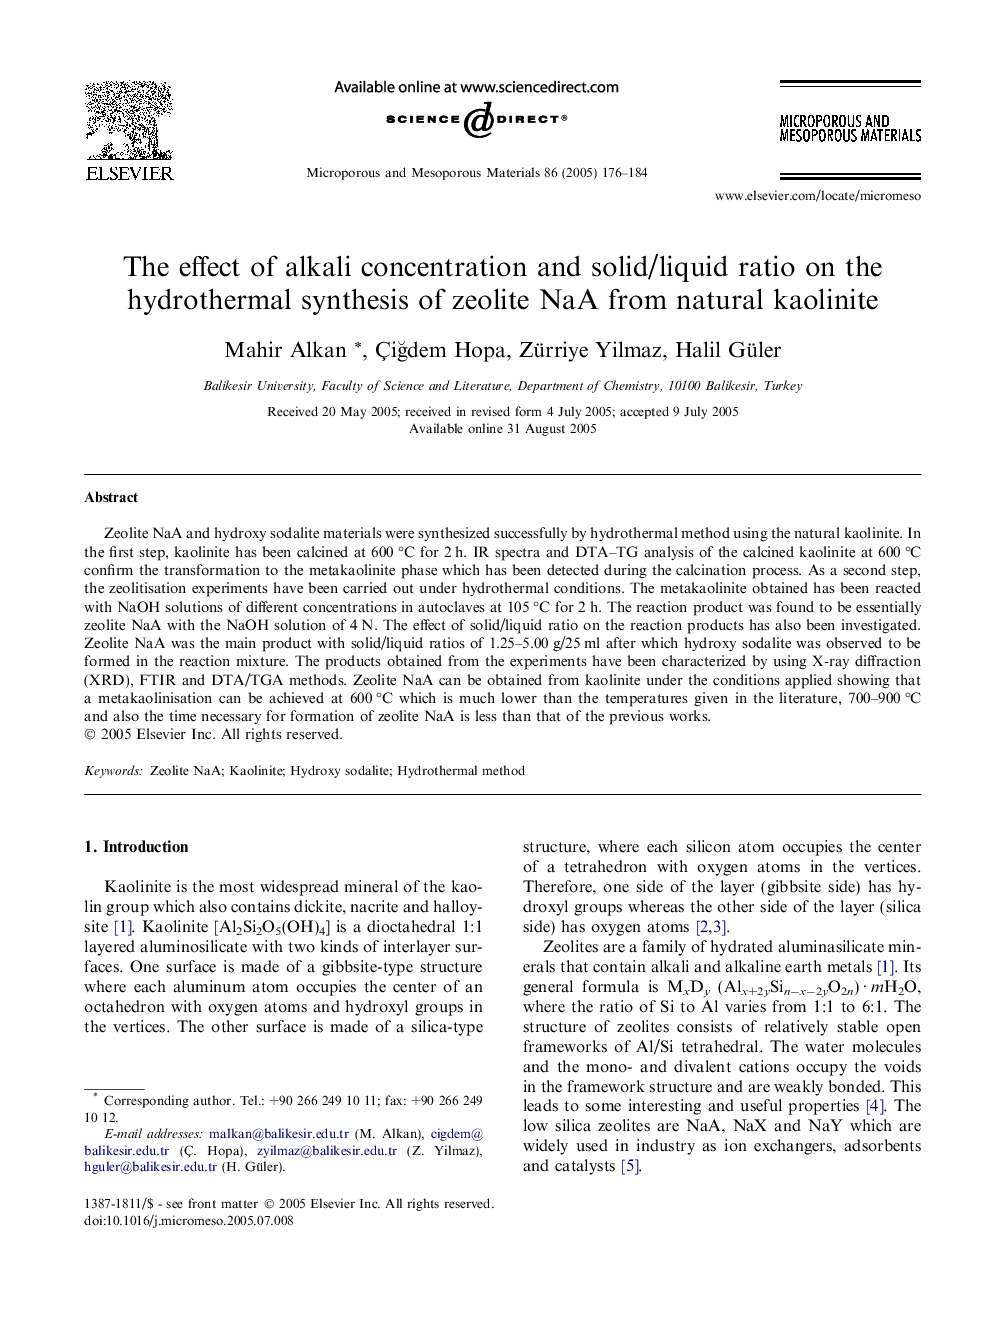 The effect of alkali concentration and solid/liquid ratio on the hydrothermal synthesis of zeolite NaA from natural kaolinite